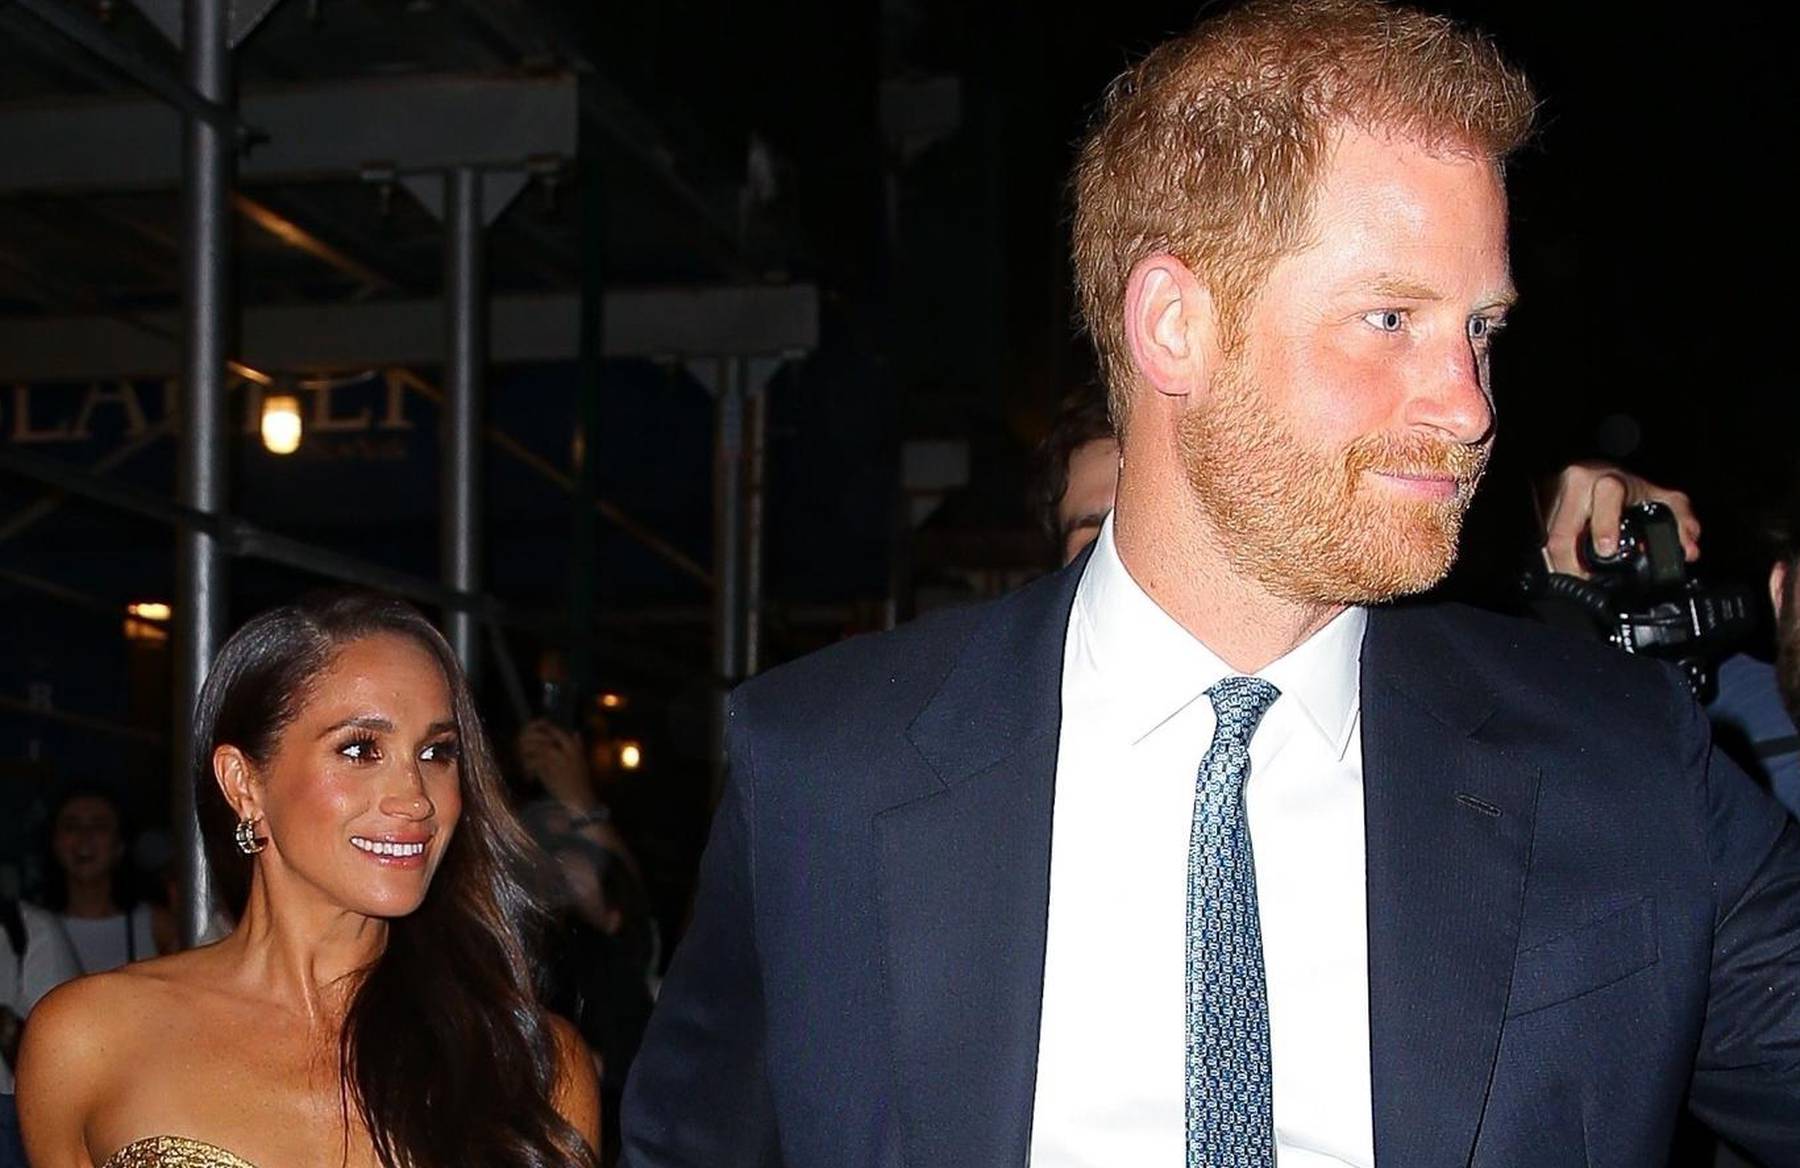 Prince Harry and Meghan Markle depart The Foundation Women of Vision Awards in NYC